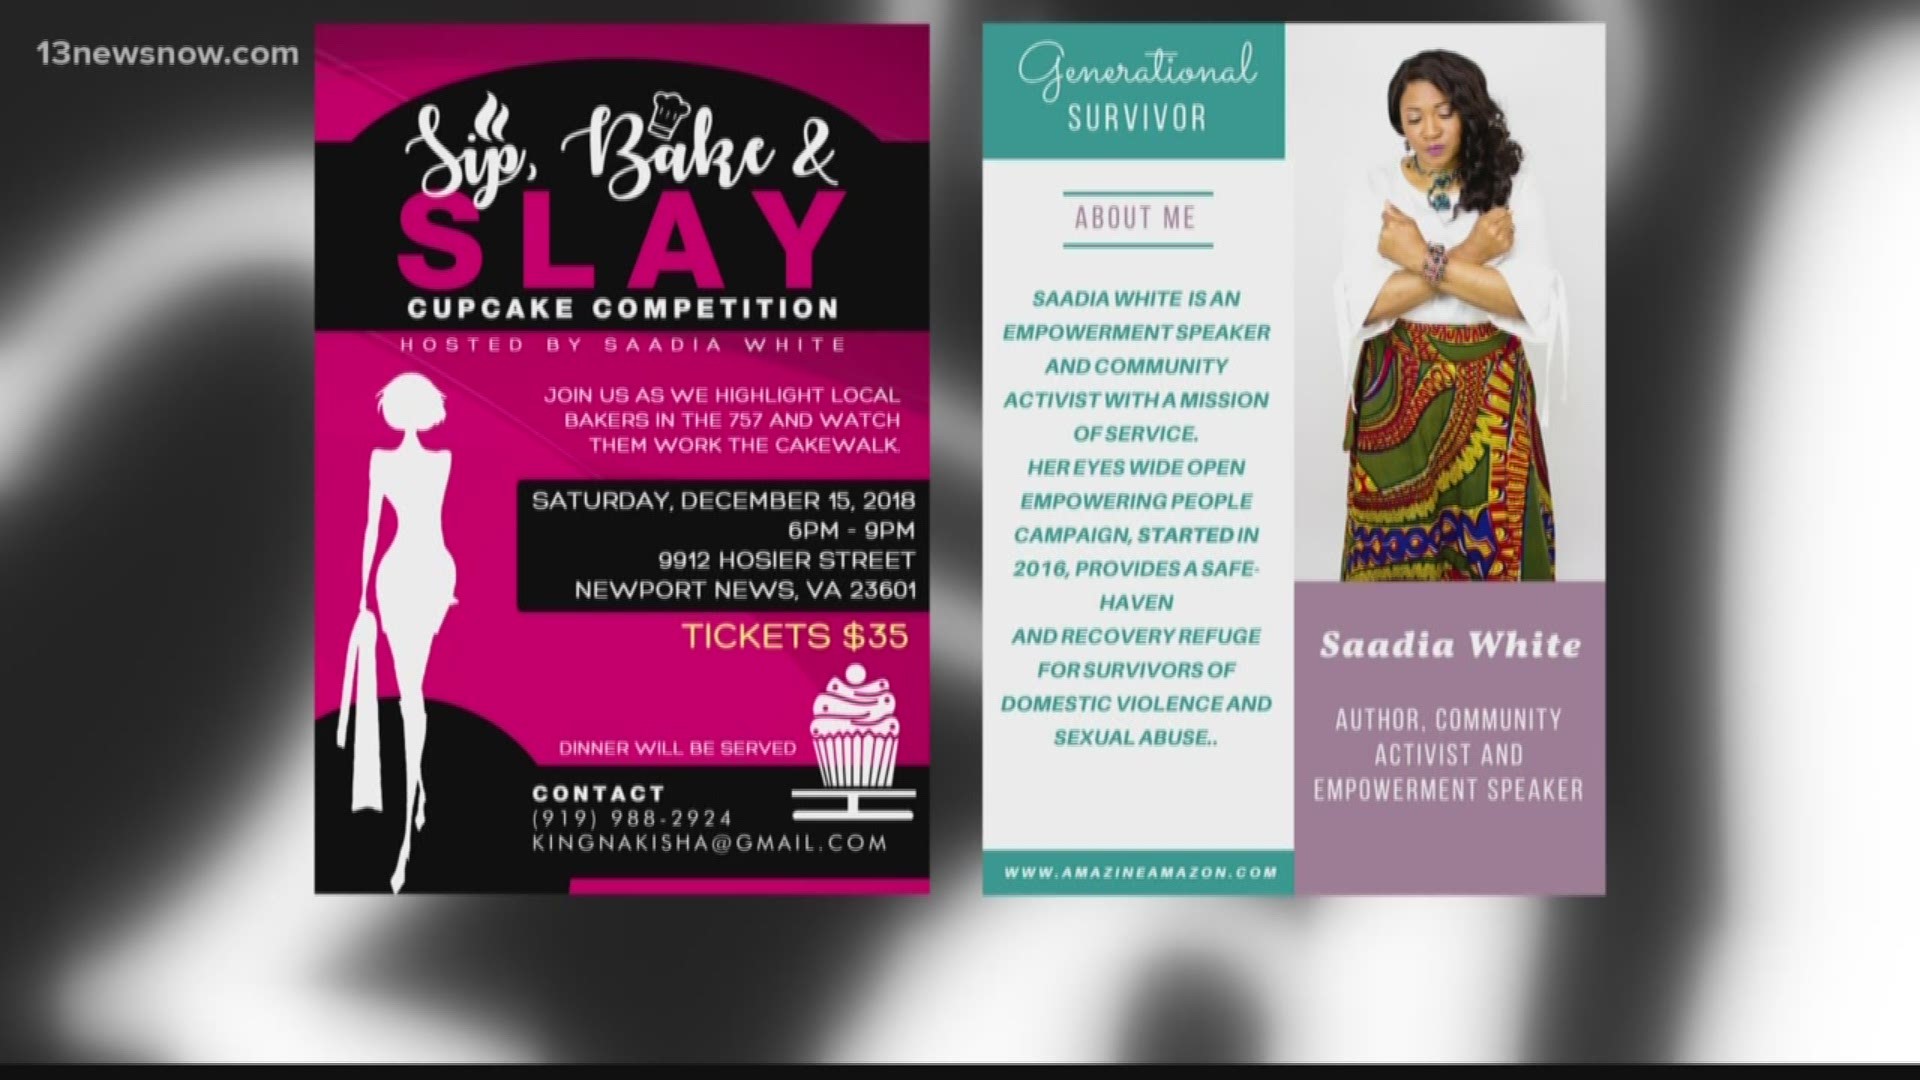 Sip, Bake & Slay Cupcake Competition will showcase local bakers and benefit the Autism Society, Tidewater Virginia. The competition, hosted by Saadia White, is slated for December 15.